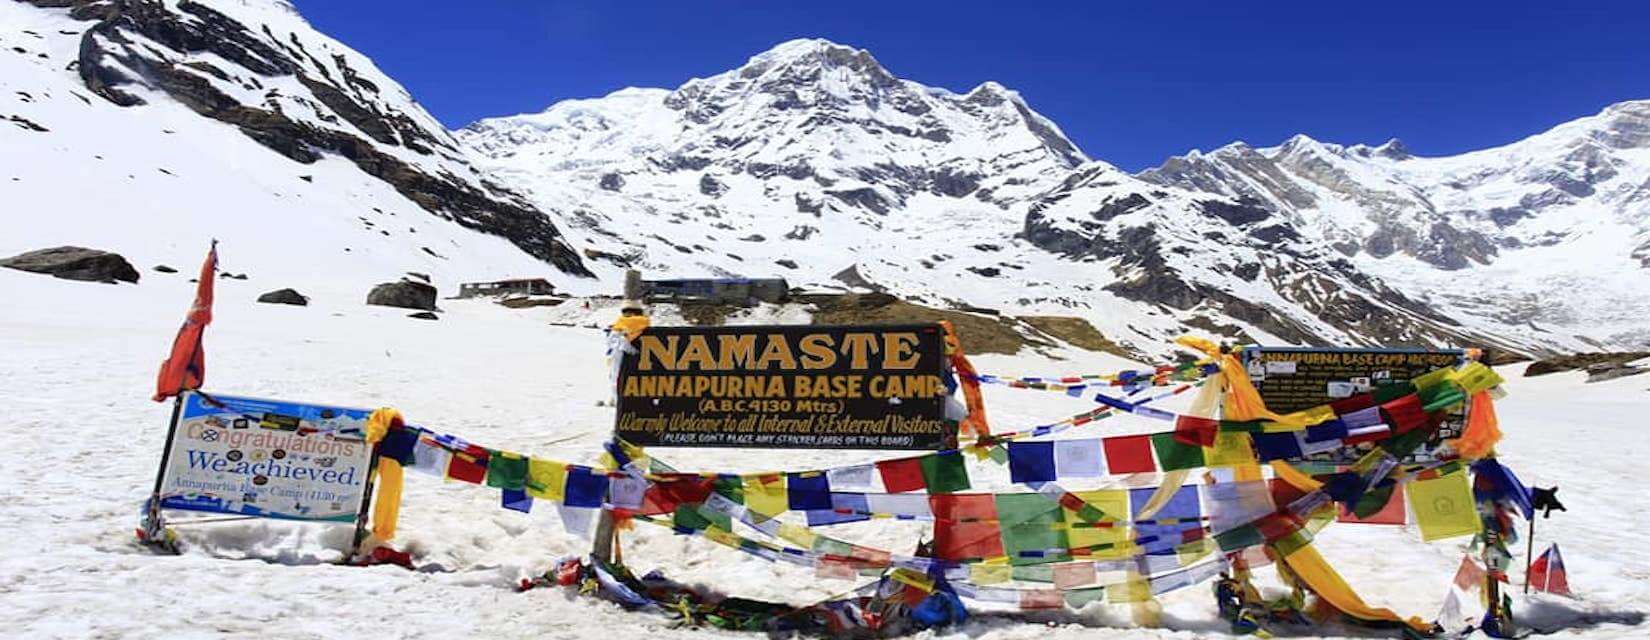 Everything you should know - Annapurna Base Camp